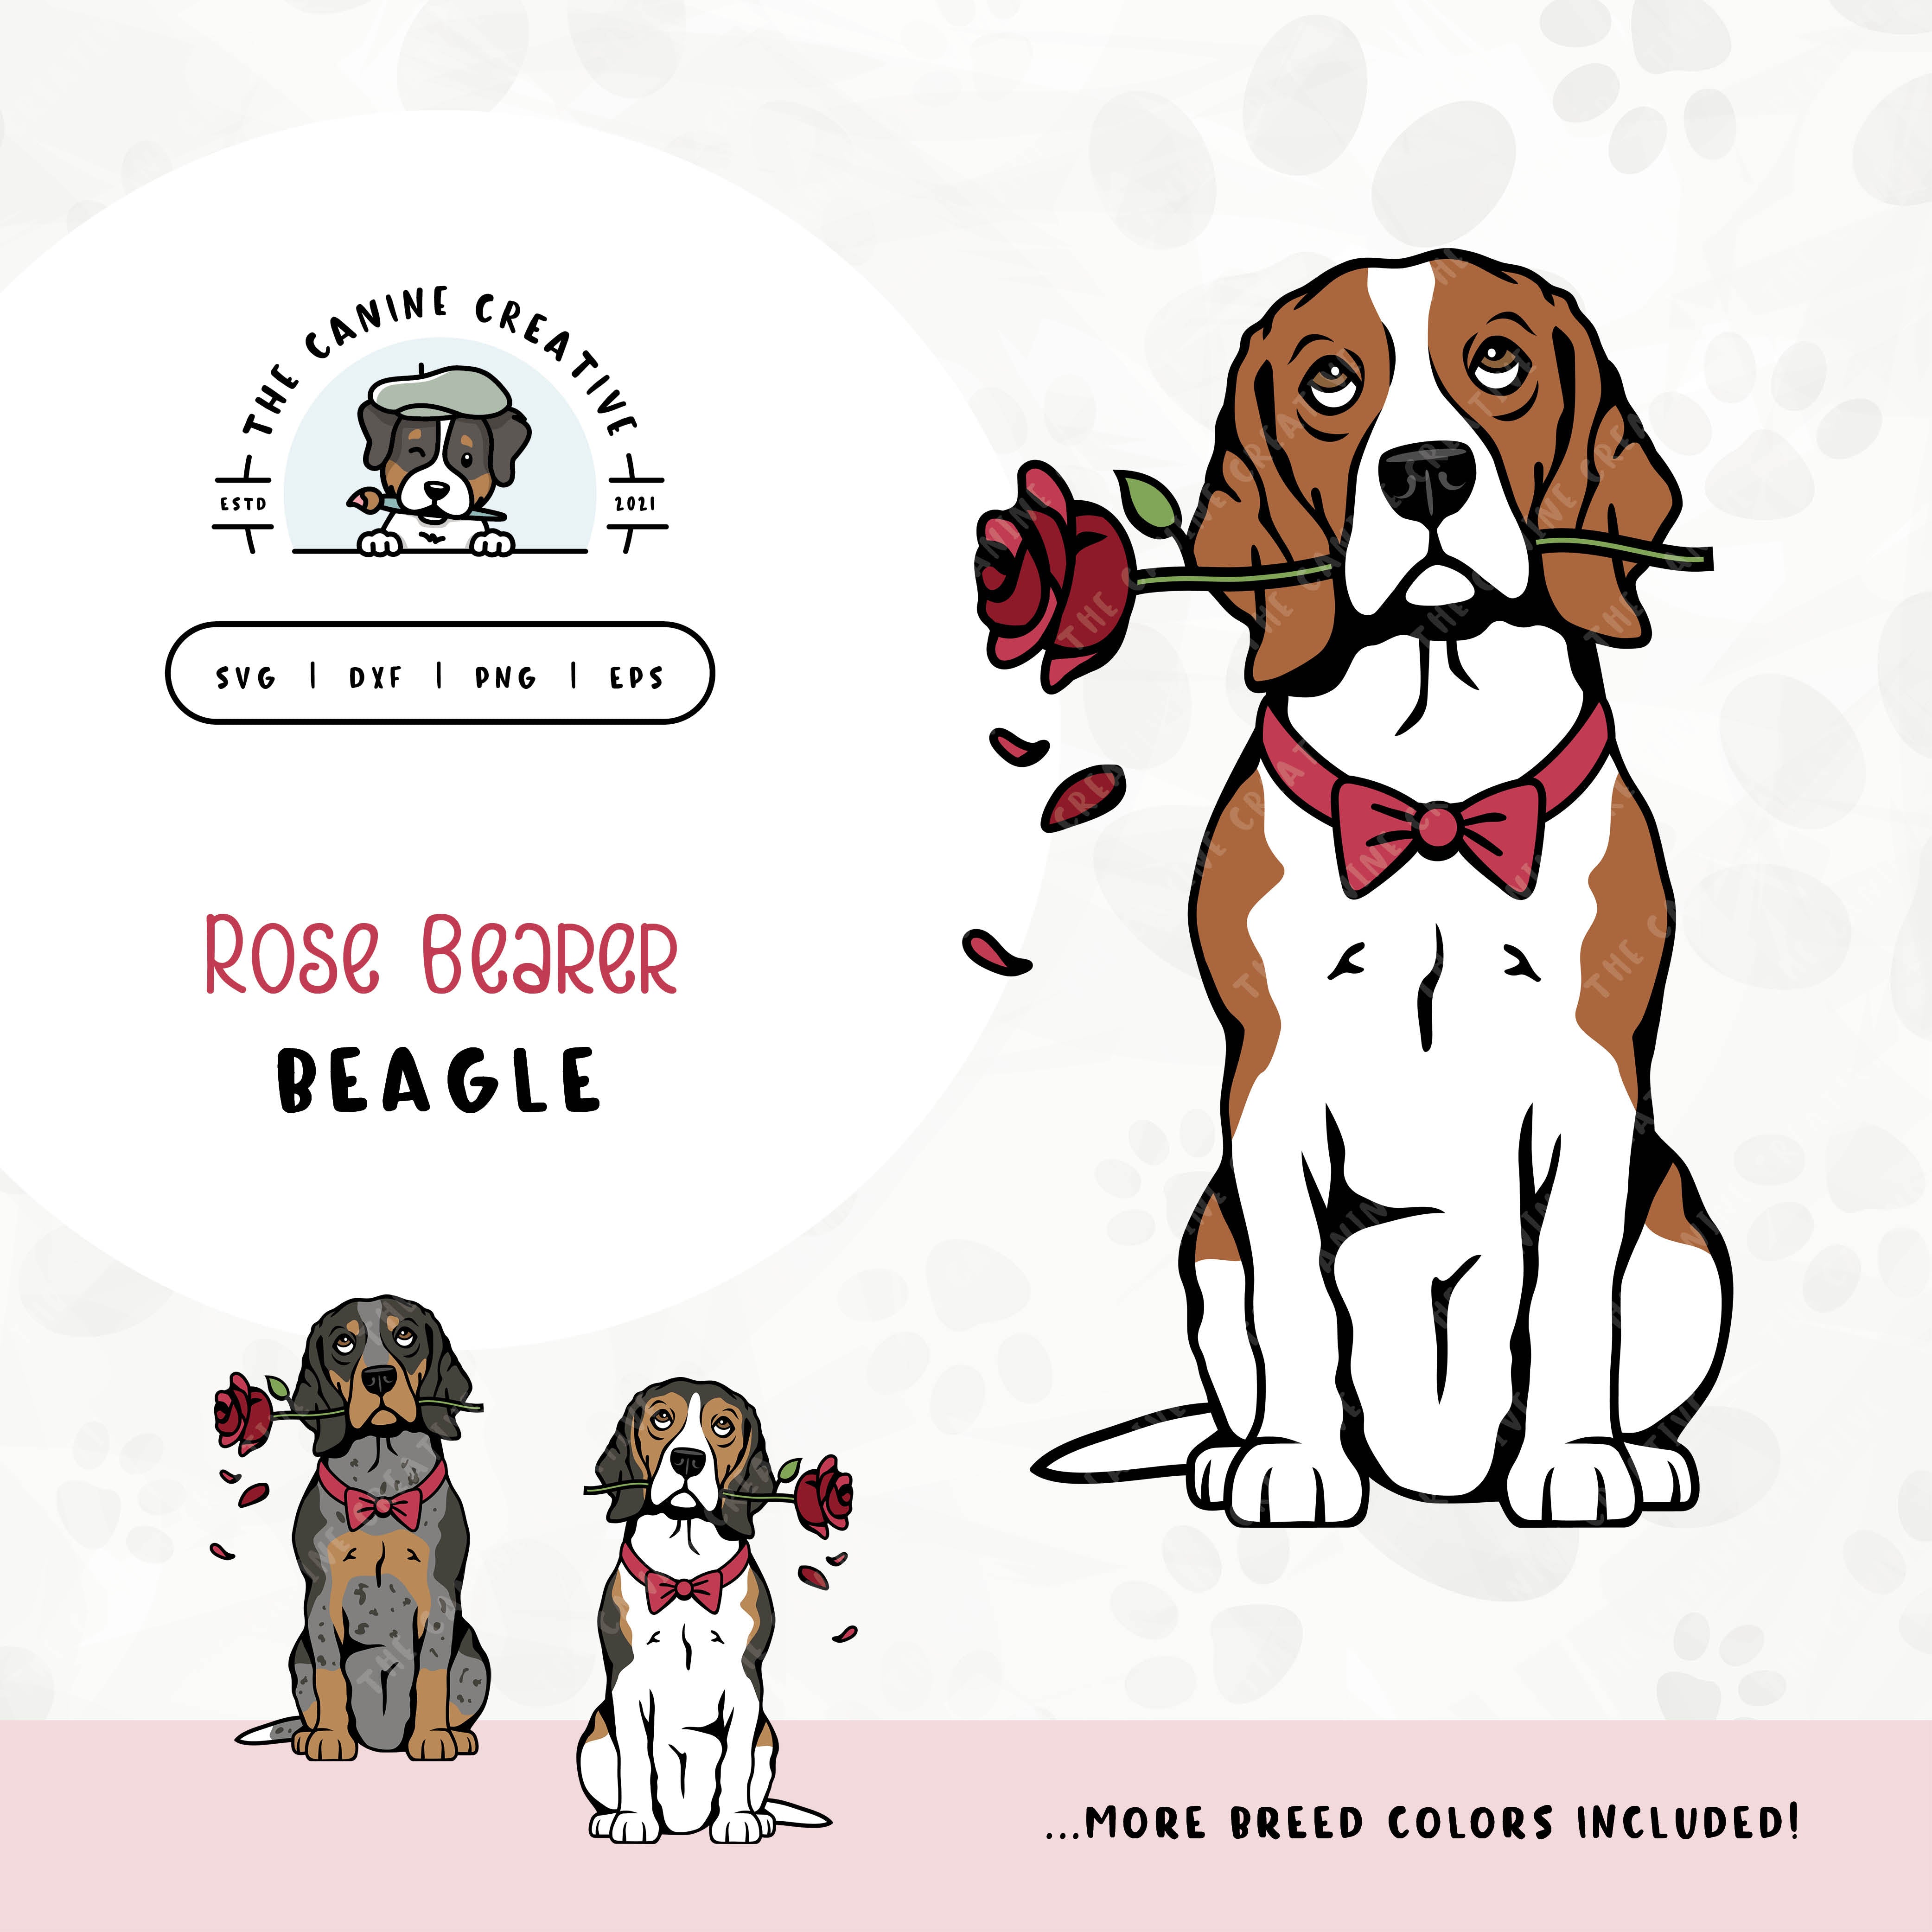 This charming illustration of a Beagle features a dapper dog adorned with a bow-tie and holding a rose. File formats include: SVG, DXF, PNG, and EPS.